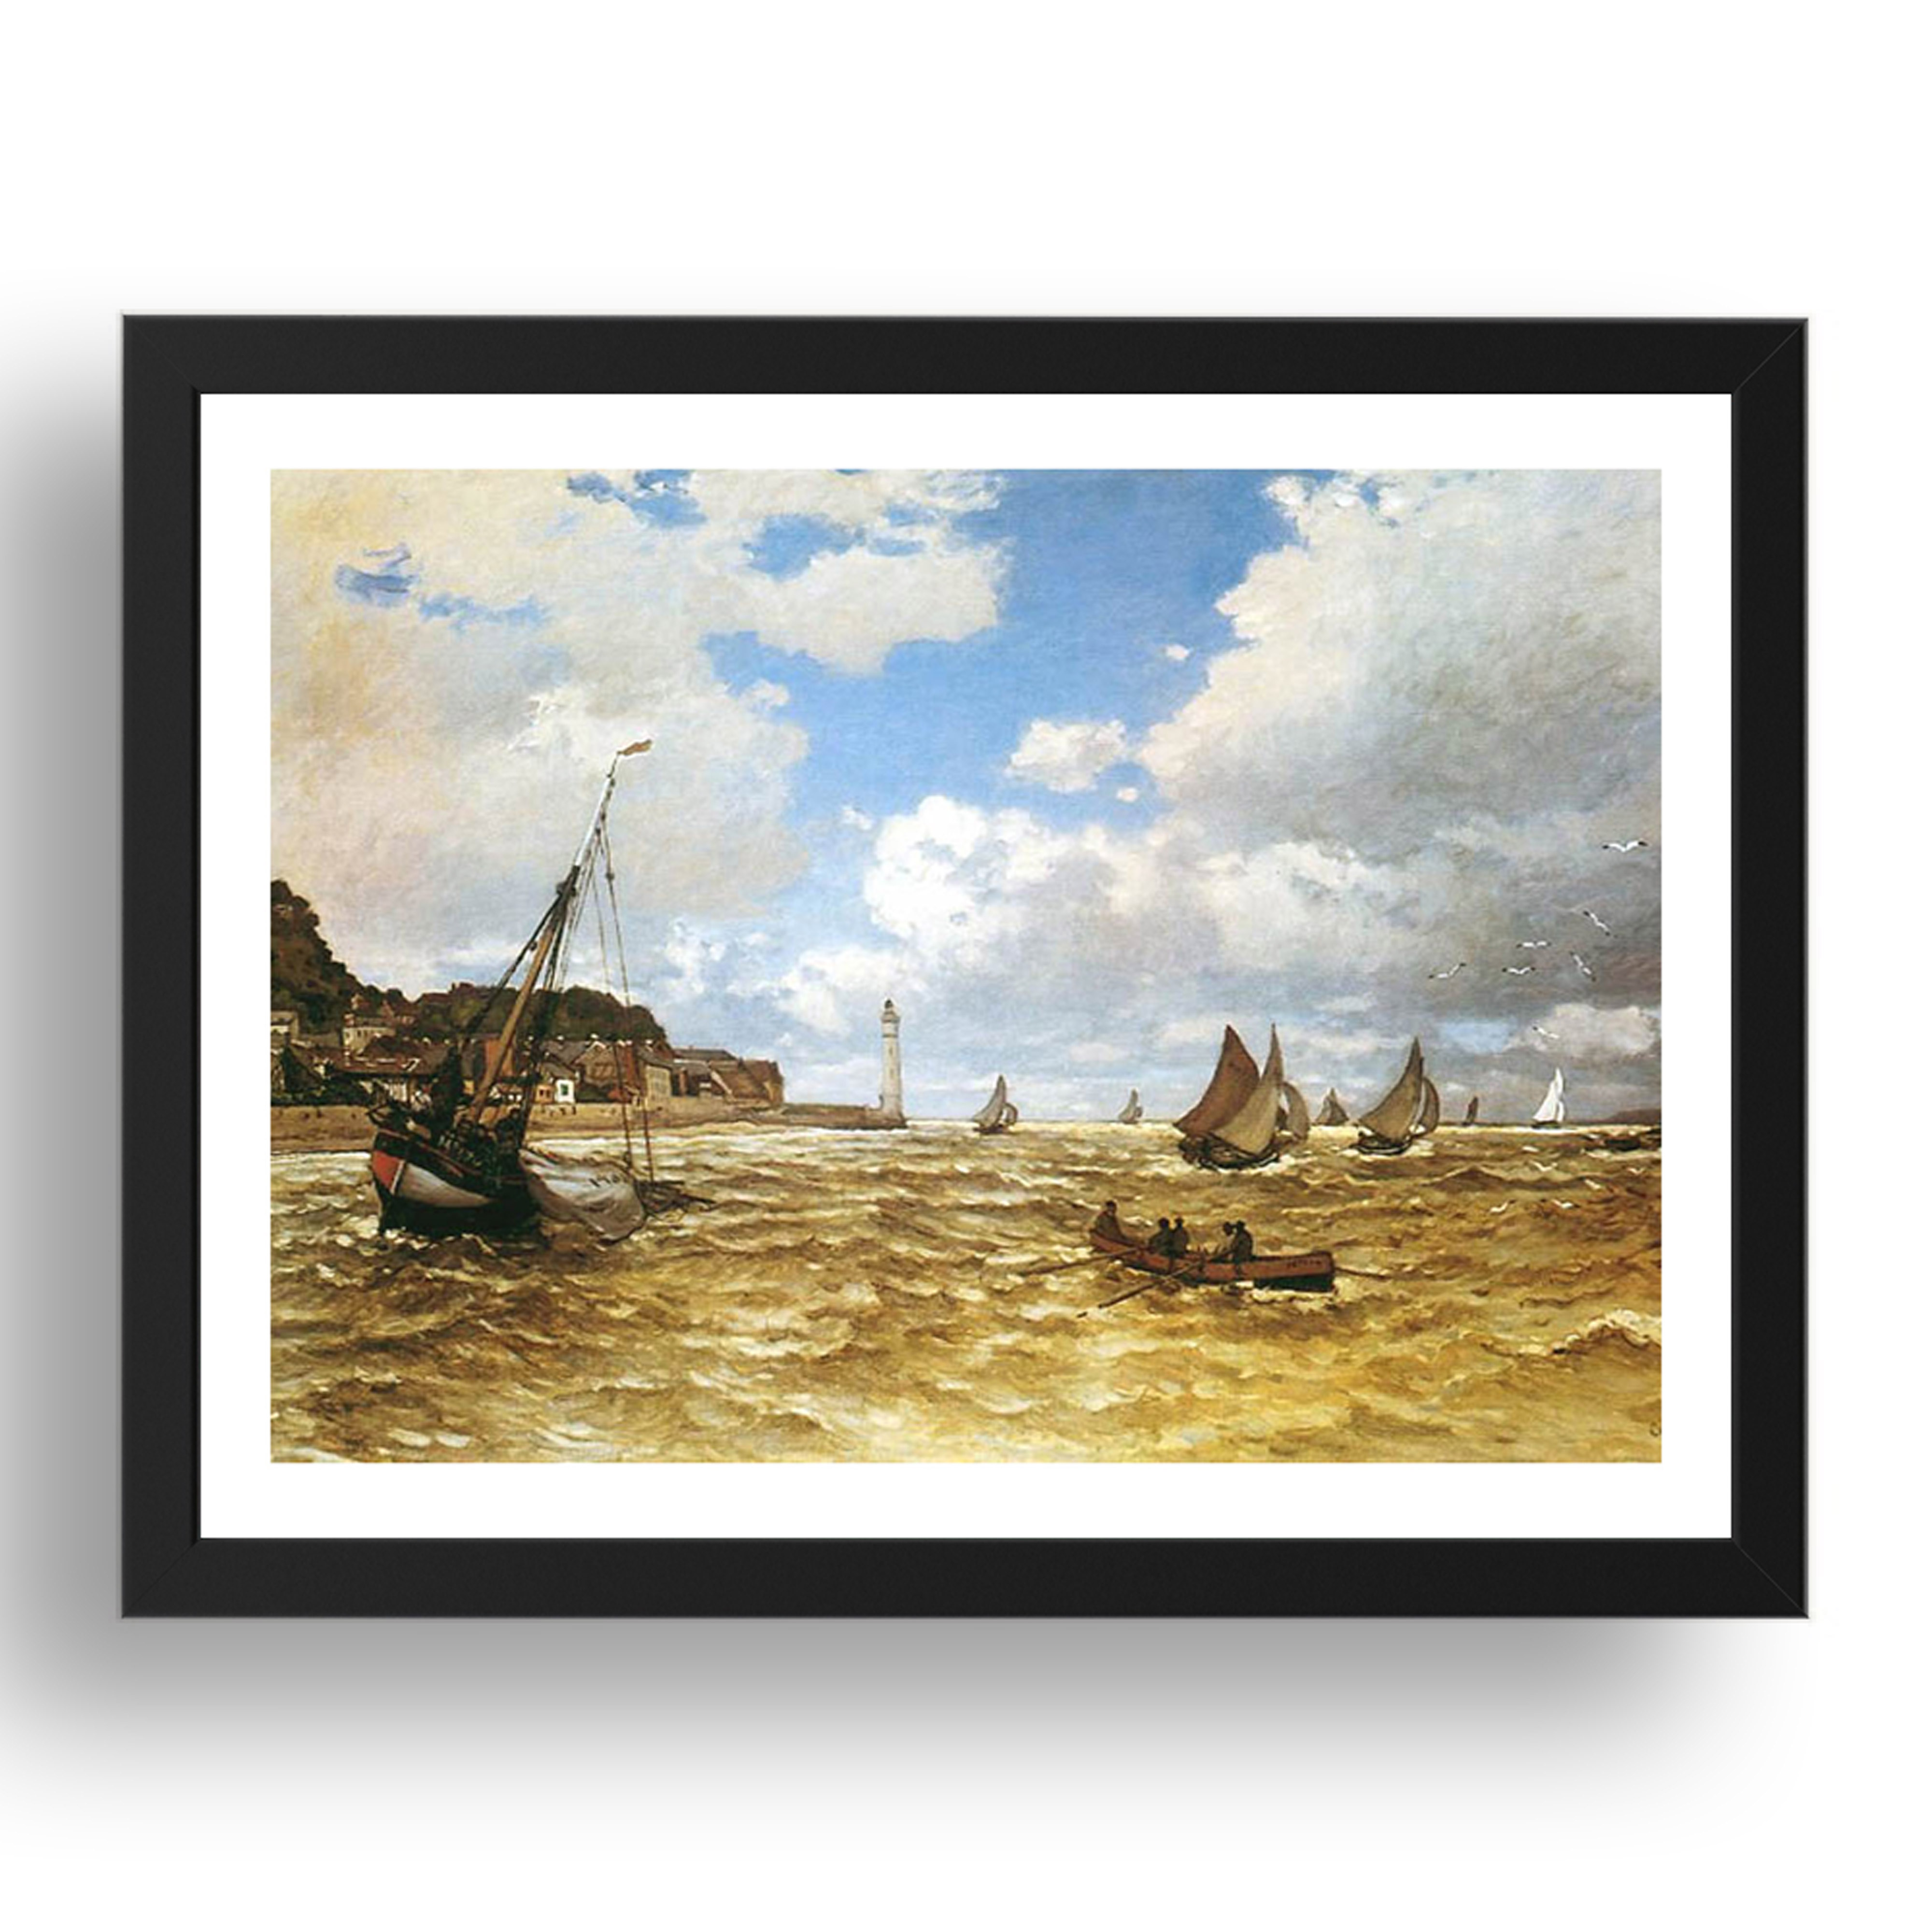 C MONET - Mouth Of The Seine At Honfleur [1865], A3 (17x13") Black Frame - Picture 1 of 1